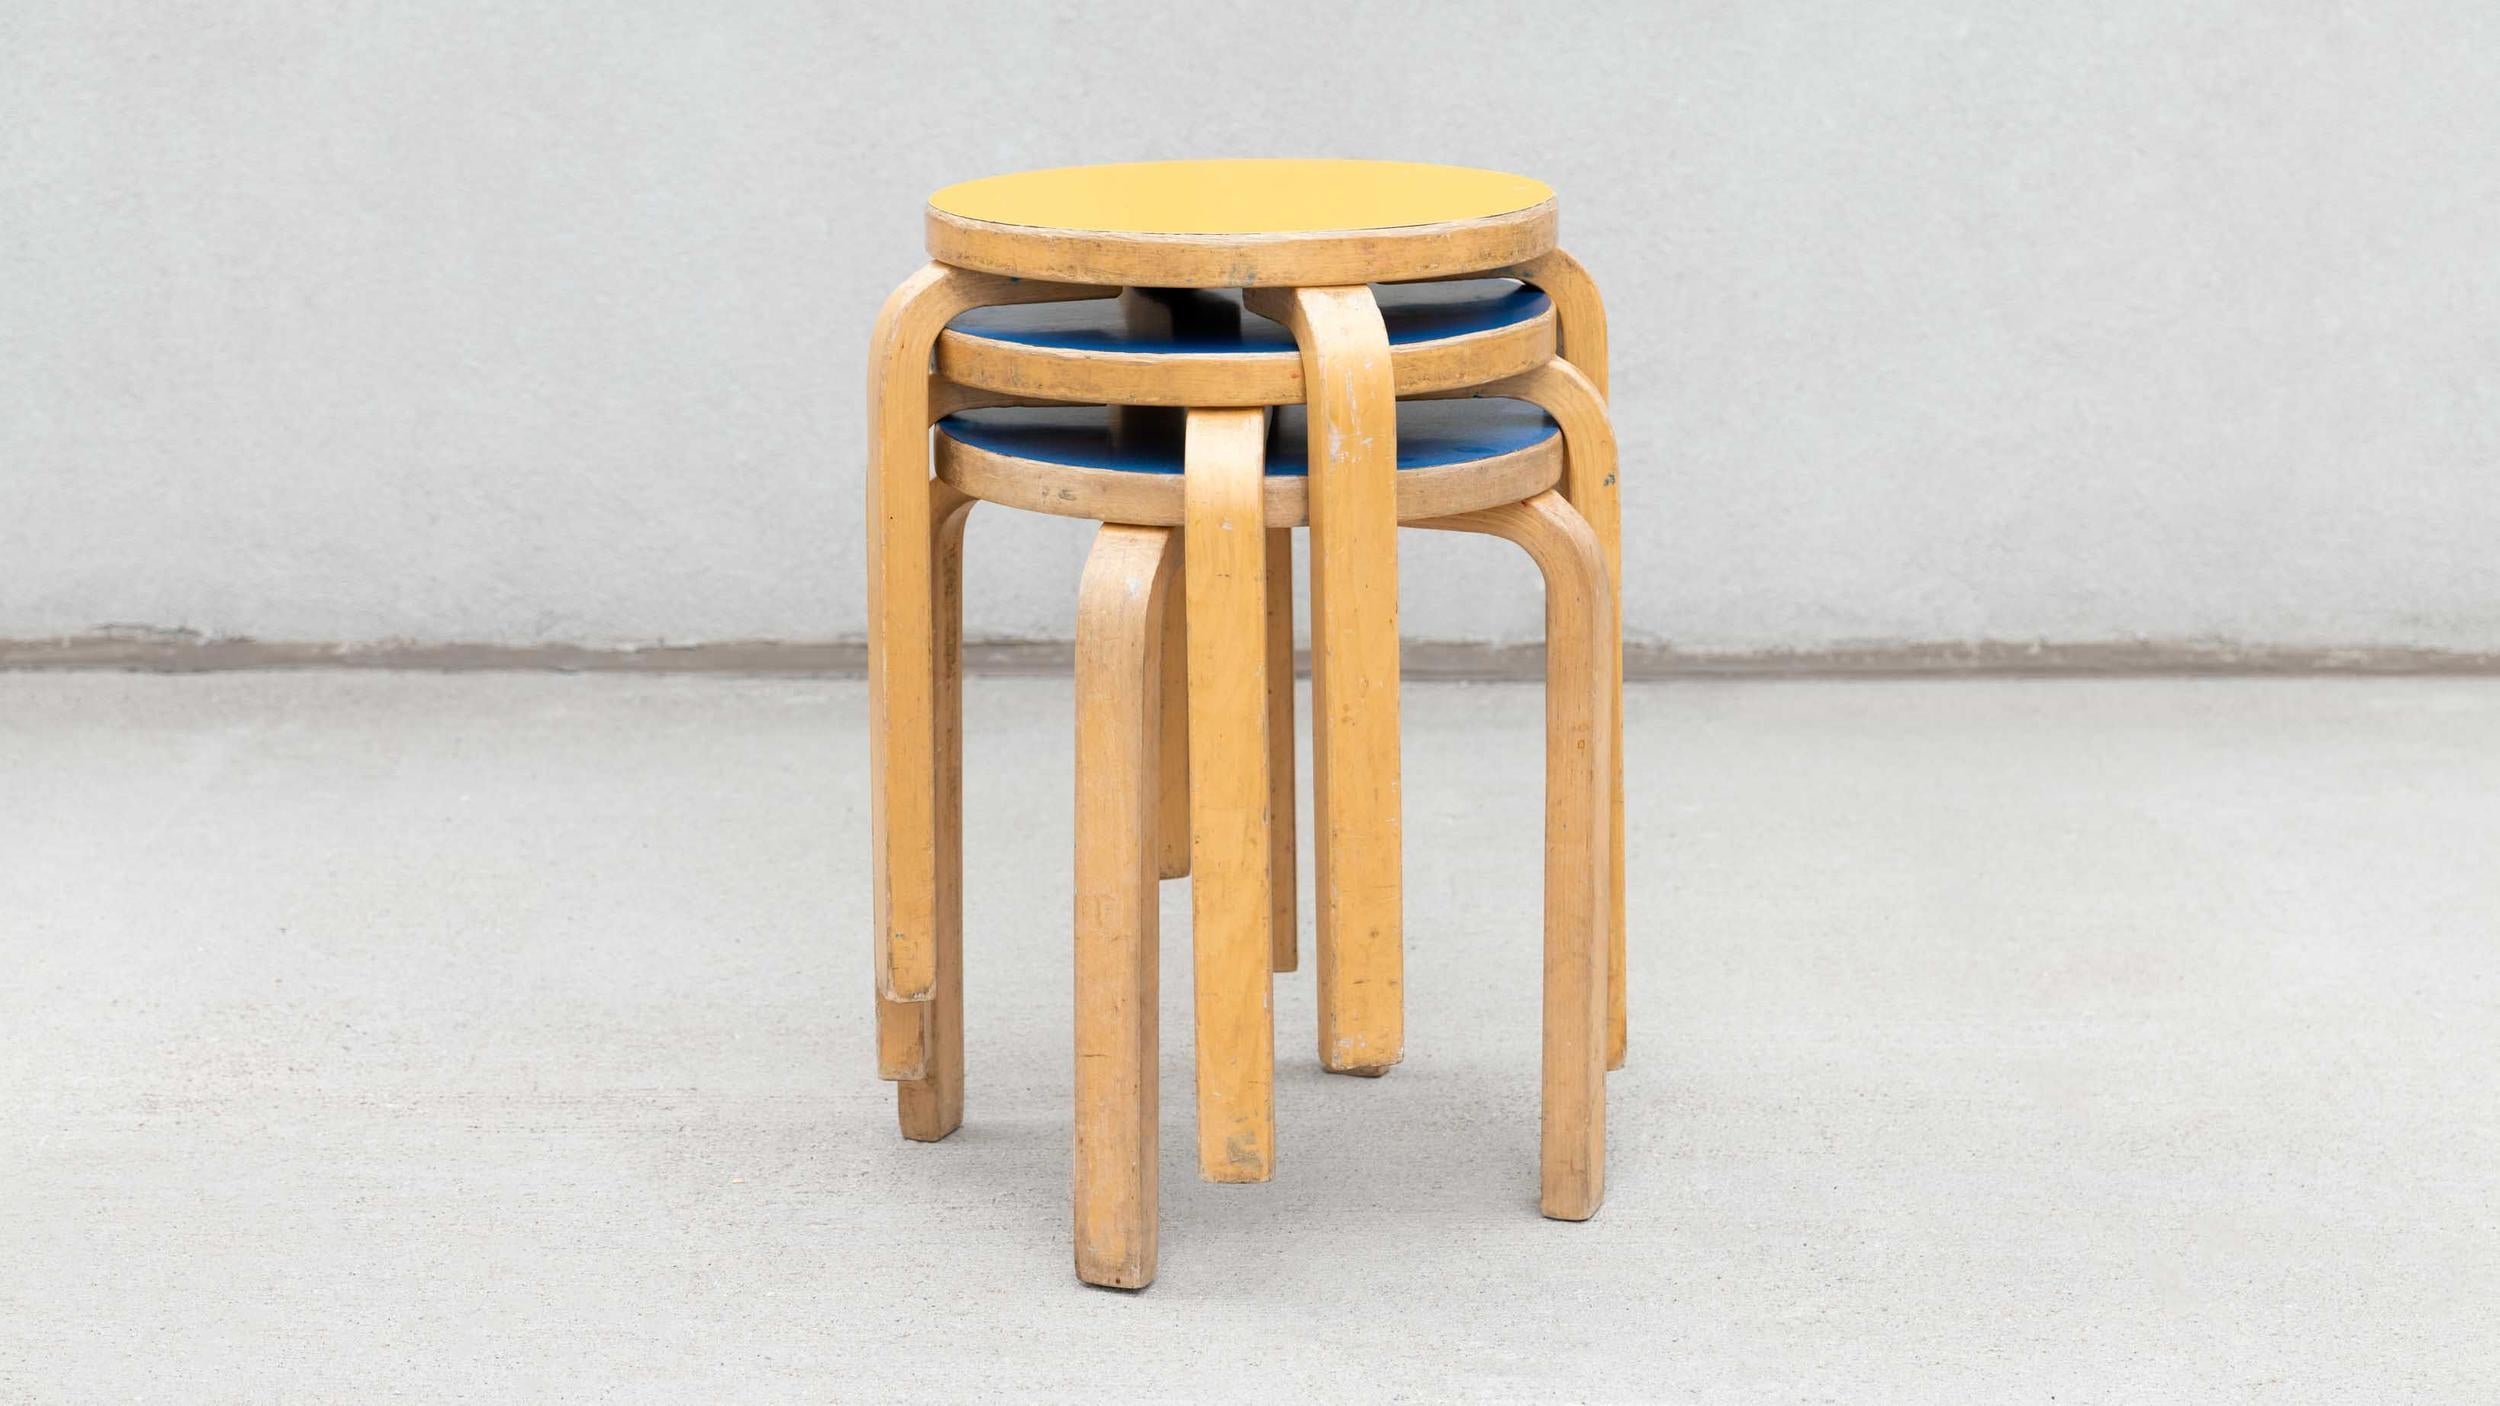 STOOL E60
ALVAR AALTO FOR ARTEK C.1950
1 available

Early model E60 stool in yellow linoleum by Alvar Aalto for Artek. Rare color and healthy patina.

color: yellow
materials: birch wood, linoleum
origin: Finland

height: 17.25 in.
width:  15 in.